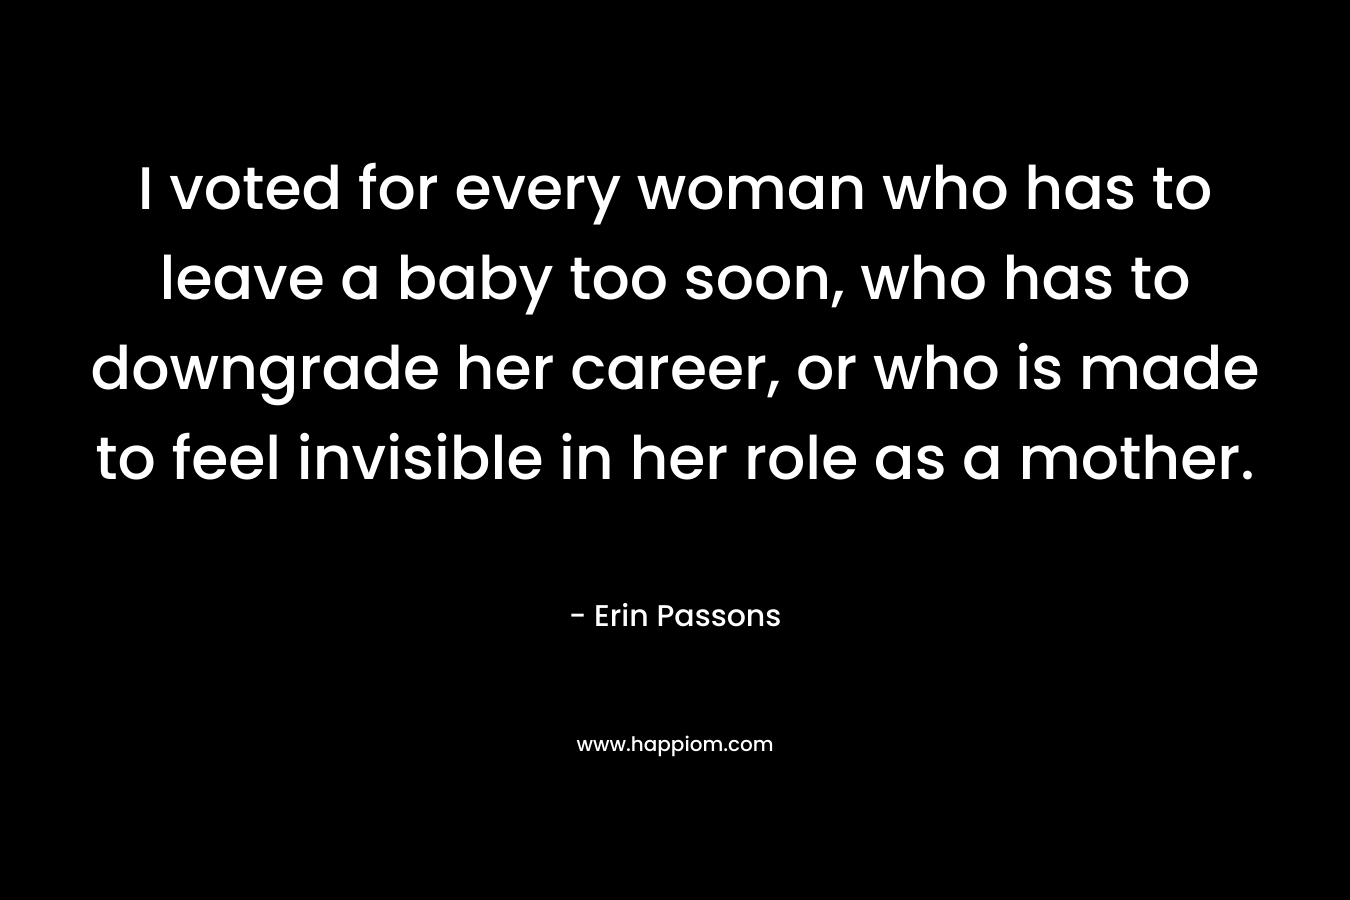 I voted for every woman who has to leave a baby too soon, who has to downgrade her career, or who is made to feel invisible in her role as a mother.